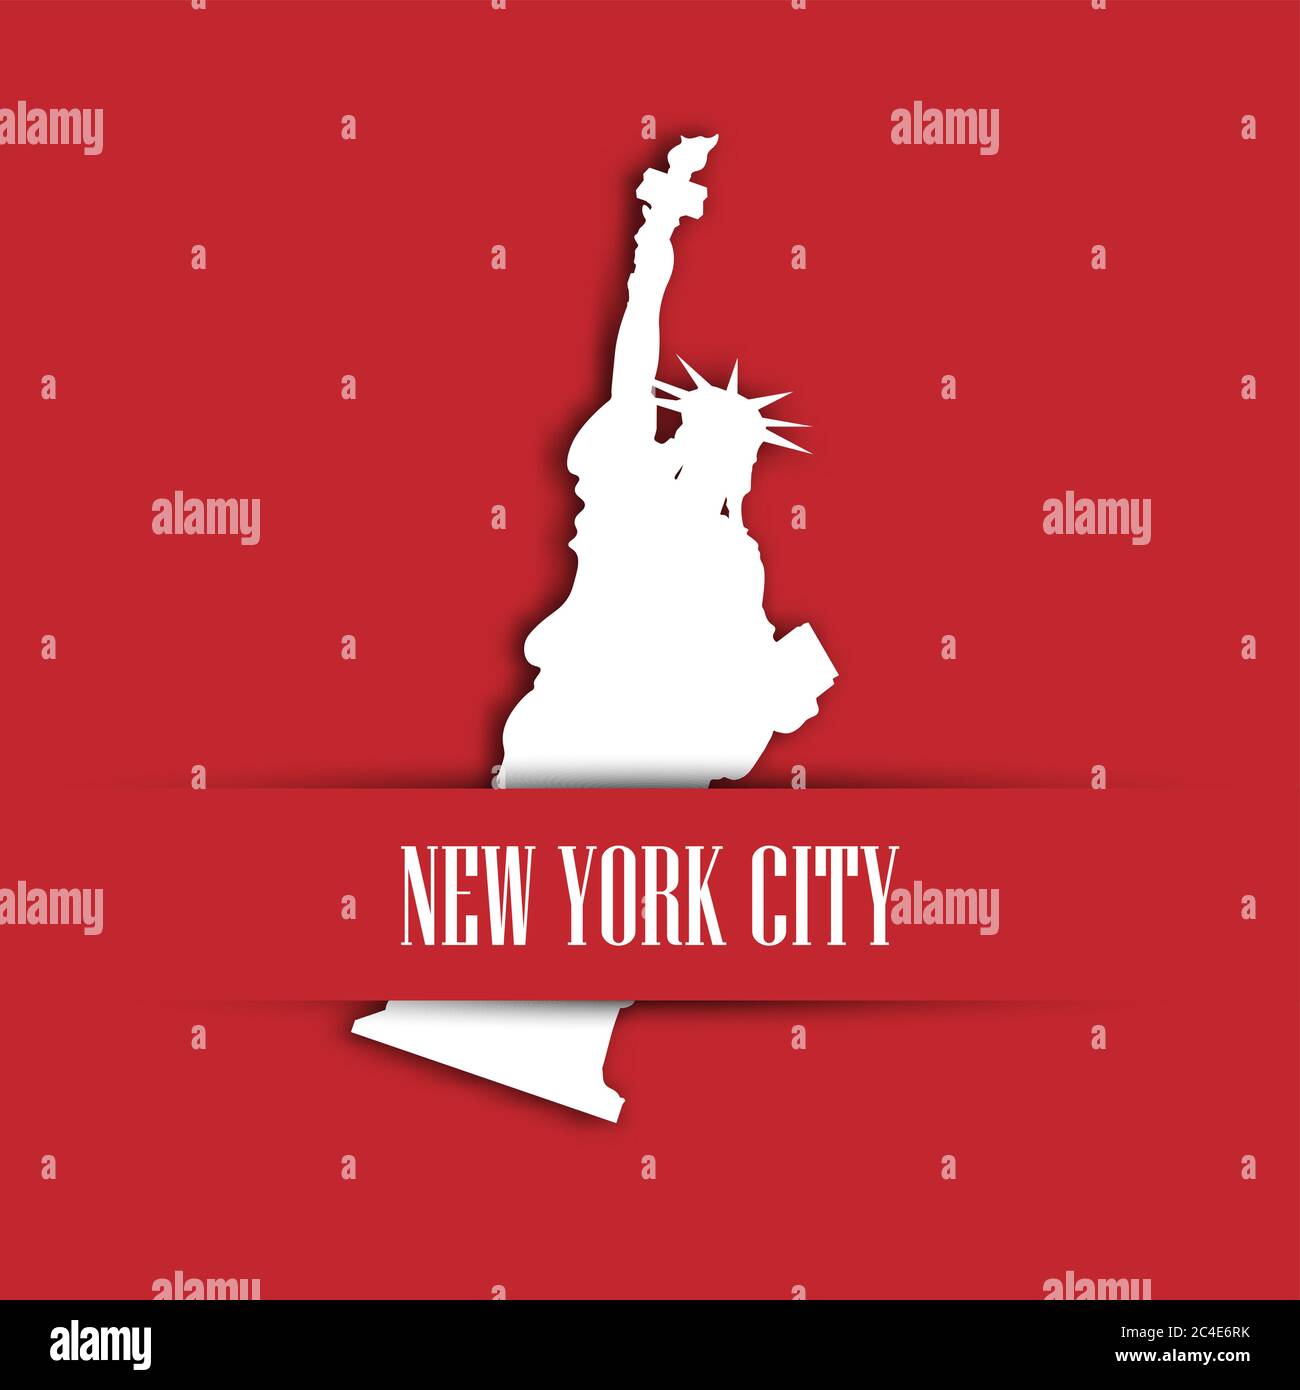 Statue of Liberty white paper cutting in red greeting card pocket with label New York City. United States symbol and Independence day theme. Vector illustration. Stock Vector